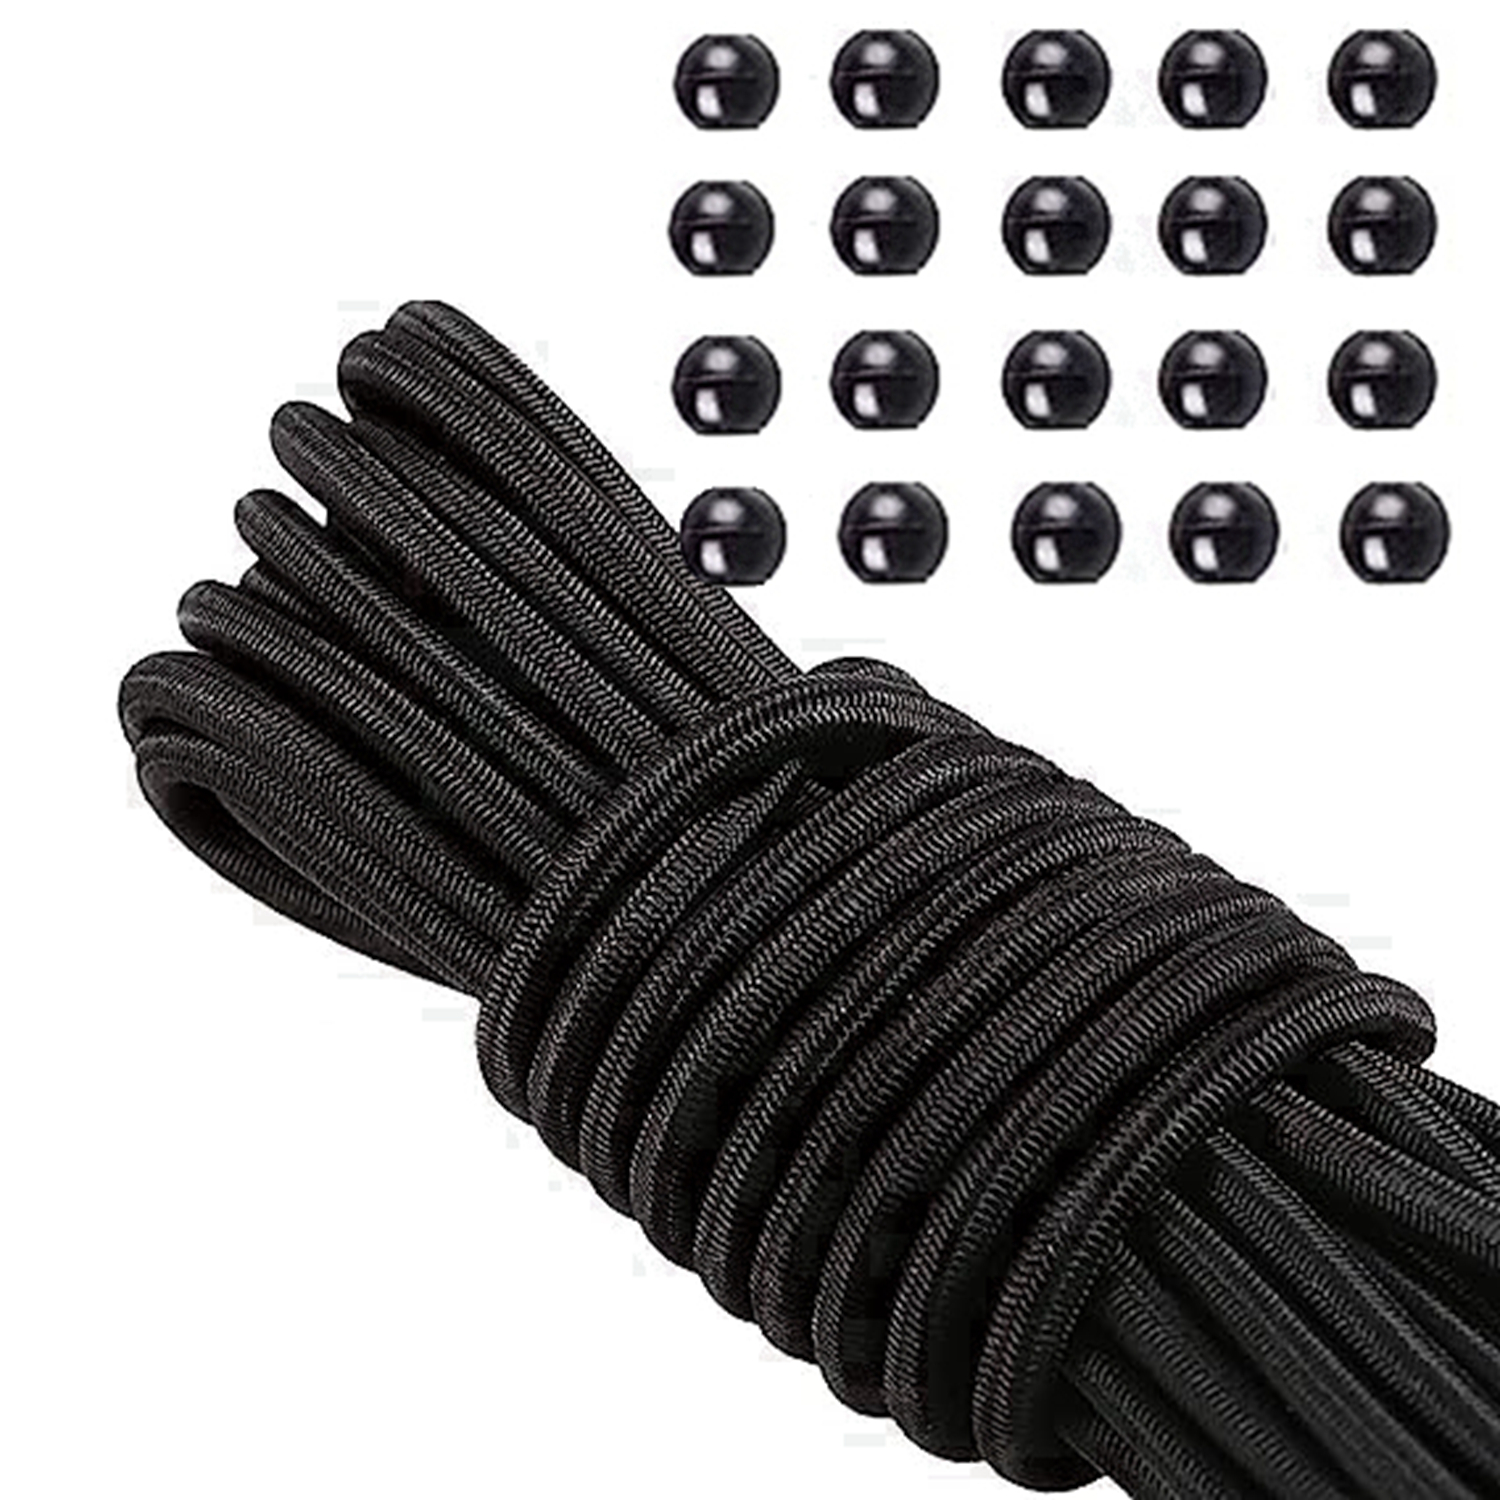 Multi Functional Bungee Cords With Balls Durable And Versatile